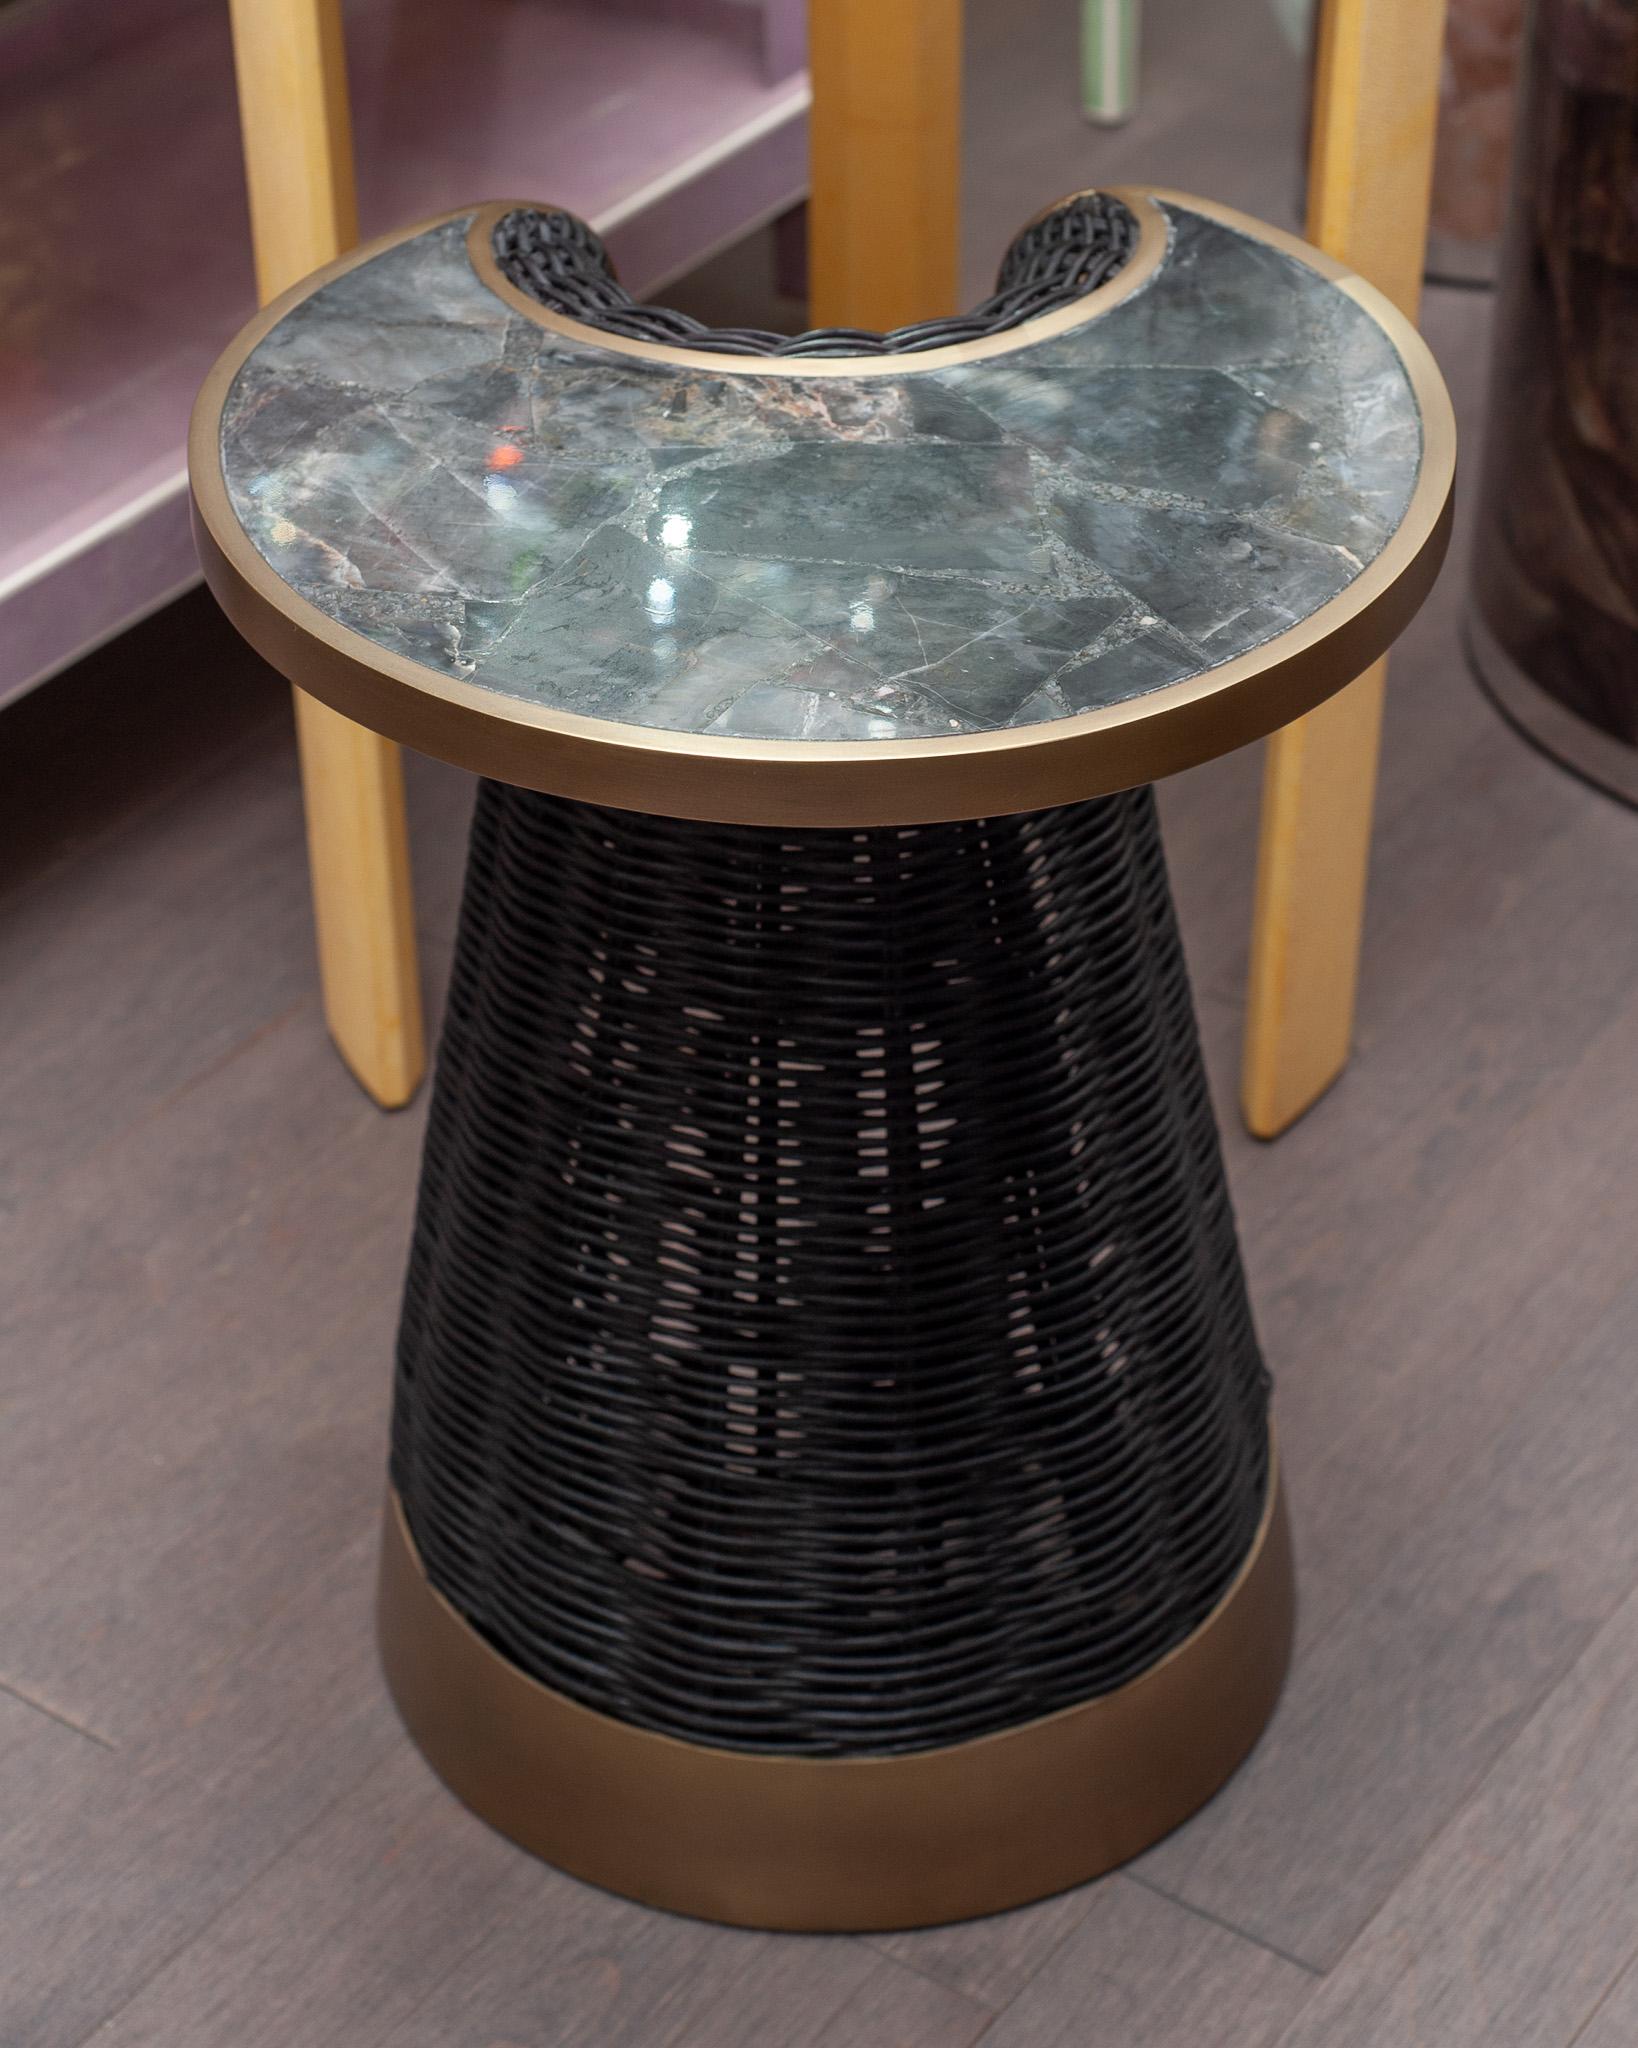 In stock and ready to ship - a stunning R&Y Augousti rattan and black quartz side table, with patinated brass structure. Elegant in its shape and curves, this side table is sturdy and beautiful made, with hand woven rattan. The underside of the